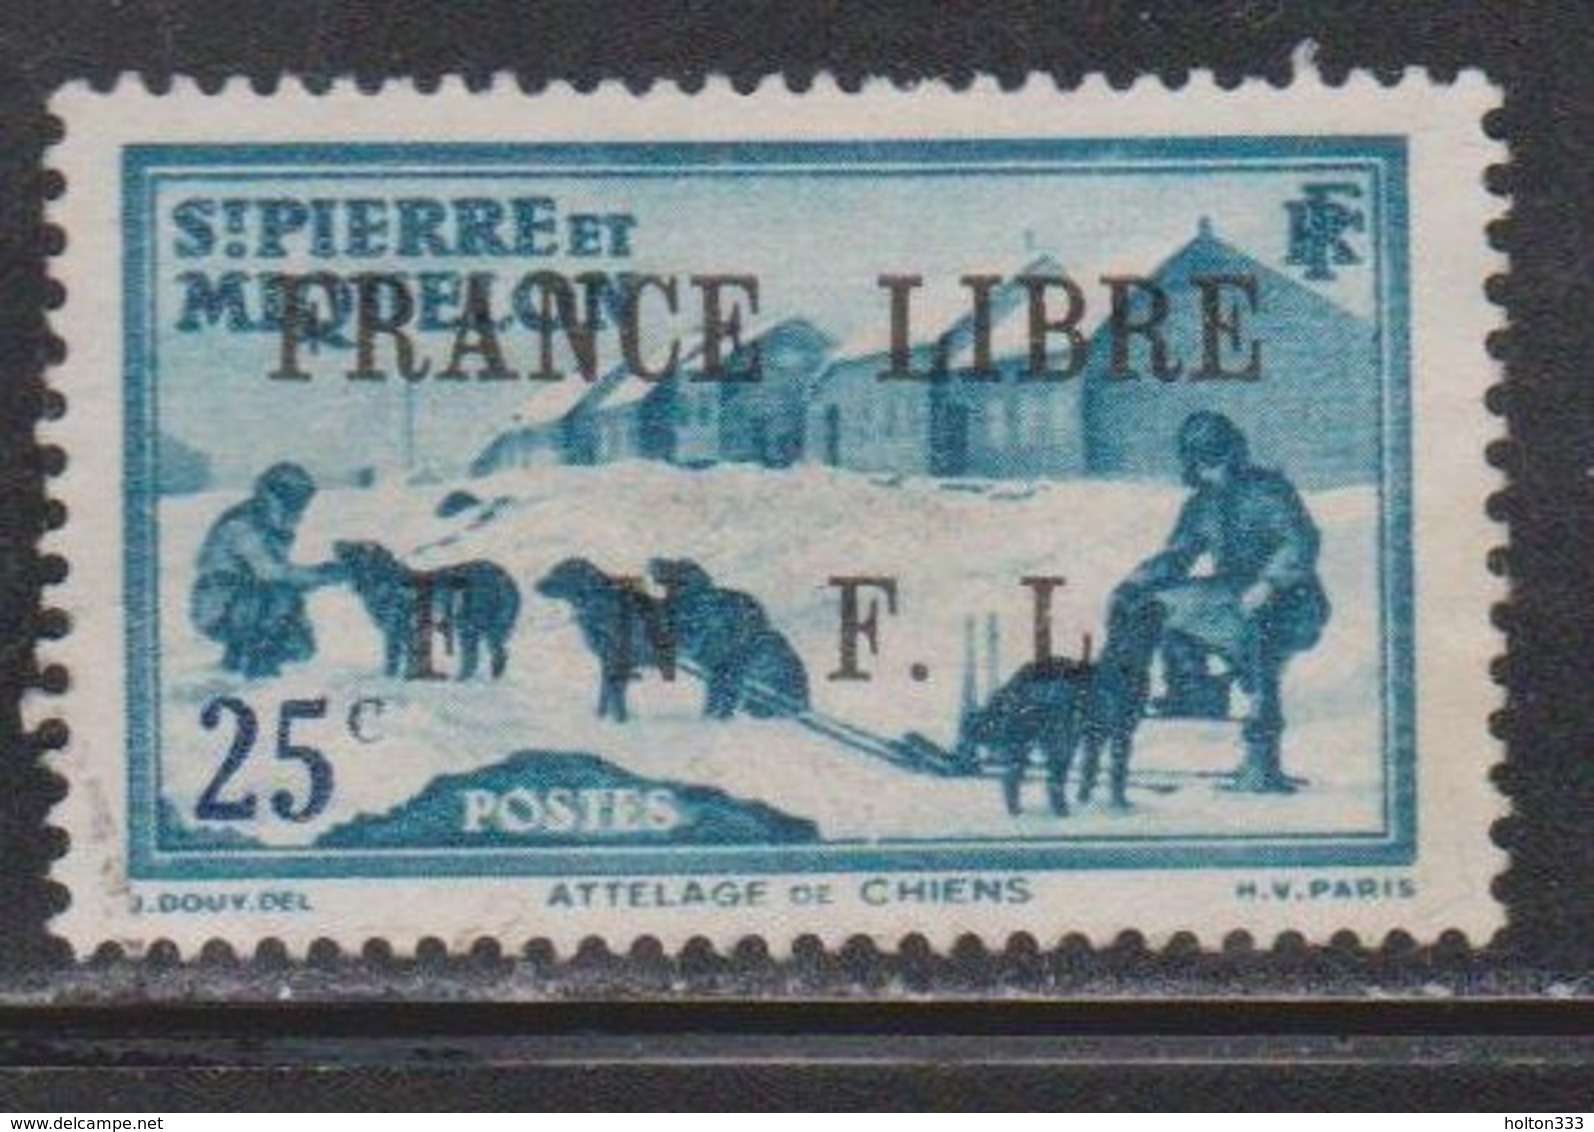 ST PIERRE & MIQUELON Scott # 229 Used - Dog Team With France Libre FNFL Overprint - Used Stamps